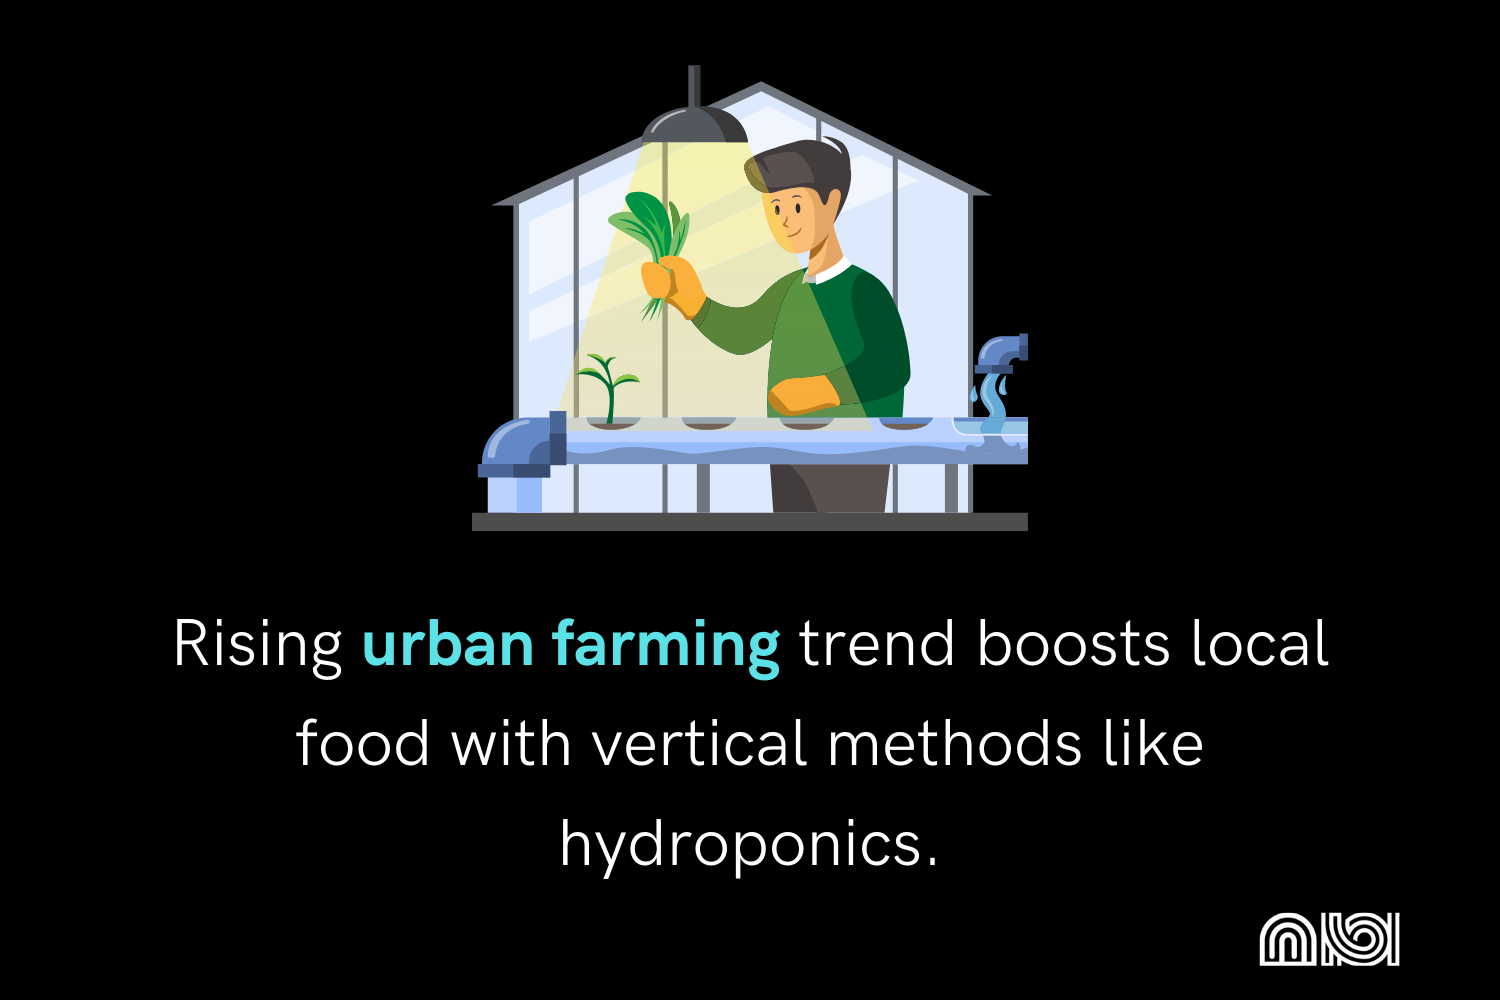 A graph showing the increasing popularity of urban farming, with a focus on innovative methods like vertical farming and hydroponics.